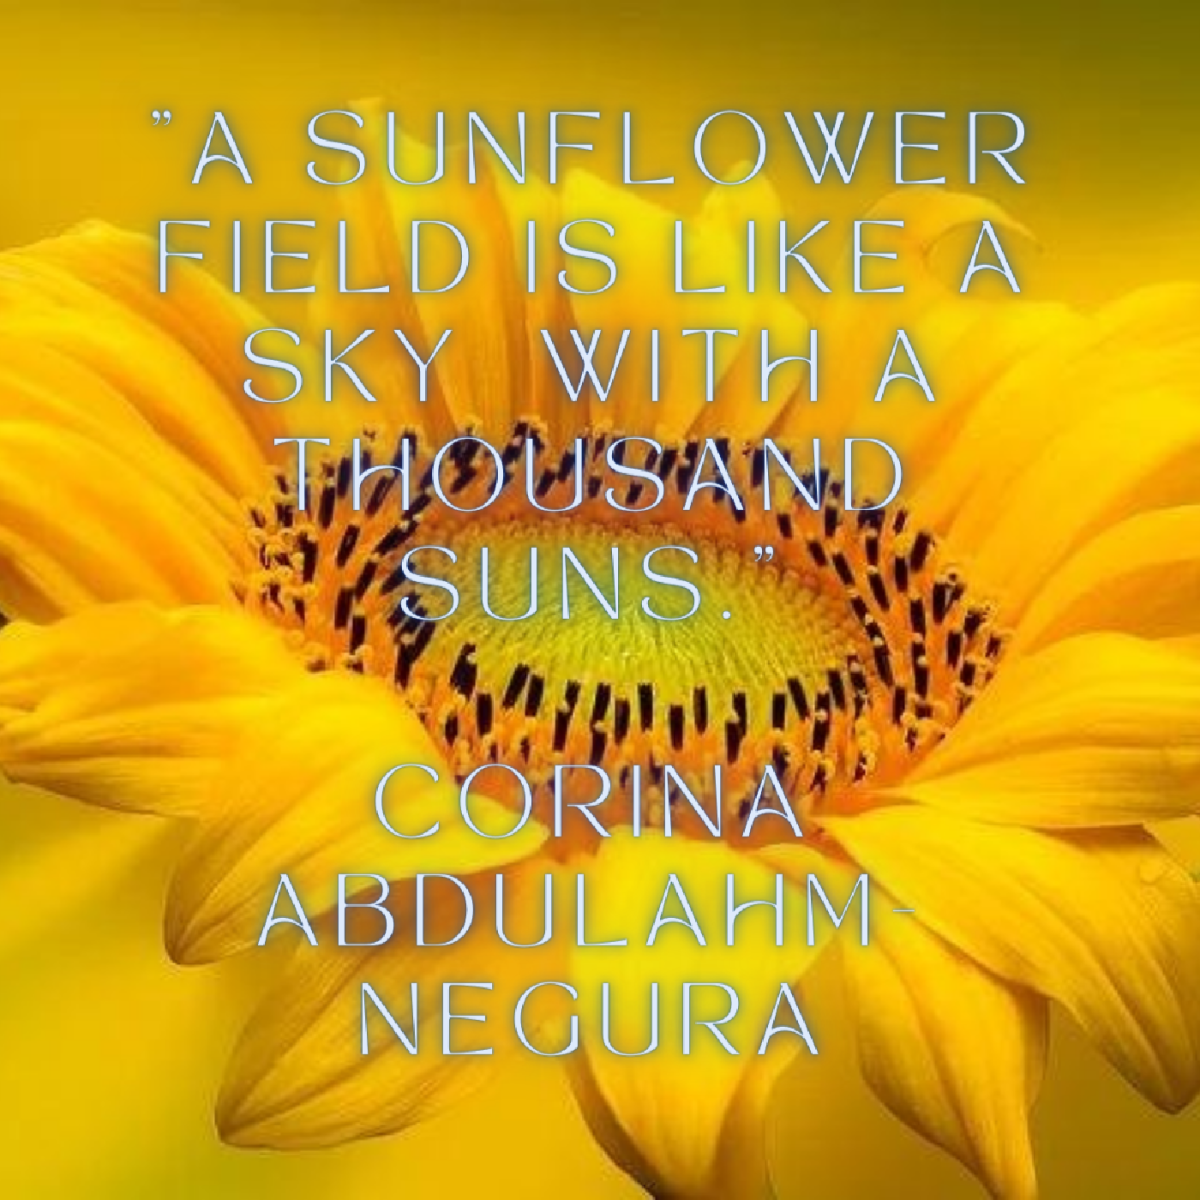 facts-about-sunflower